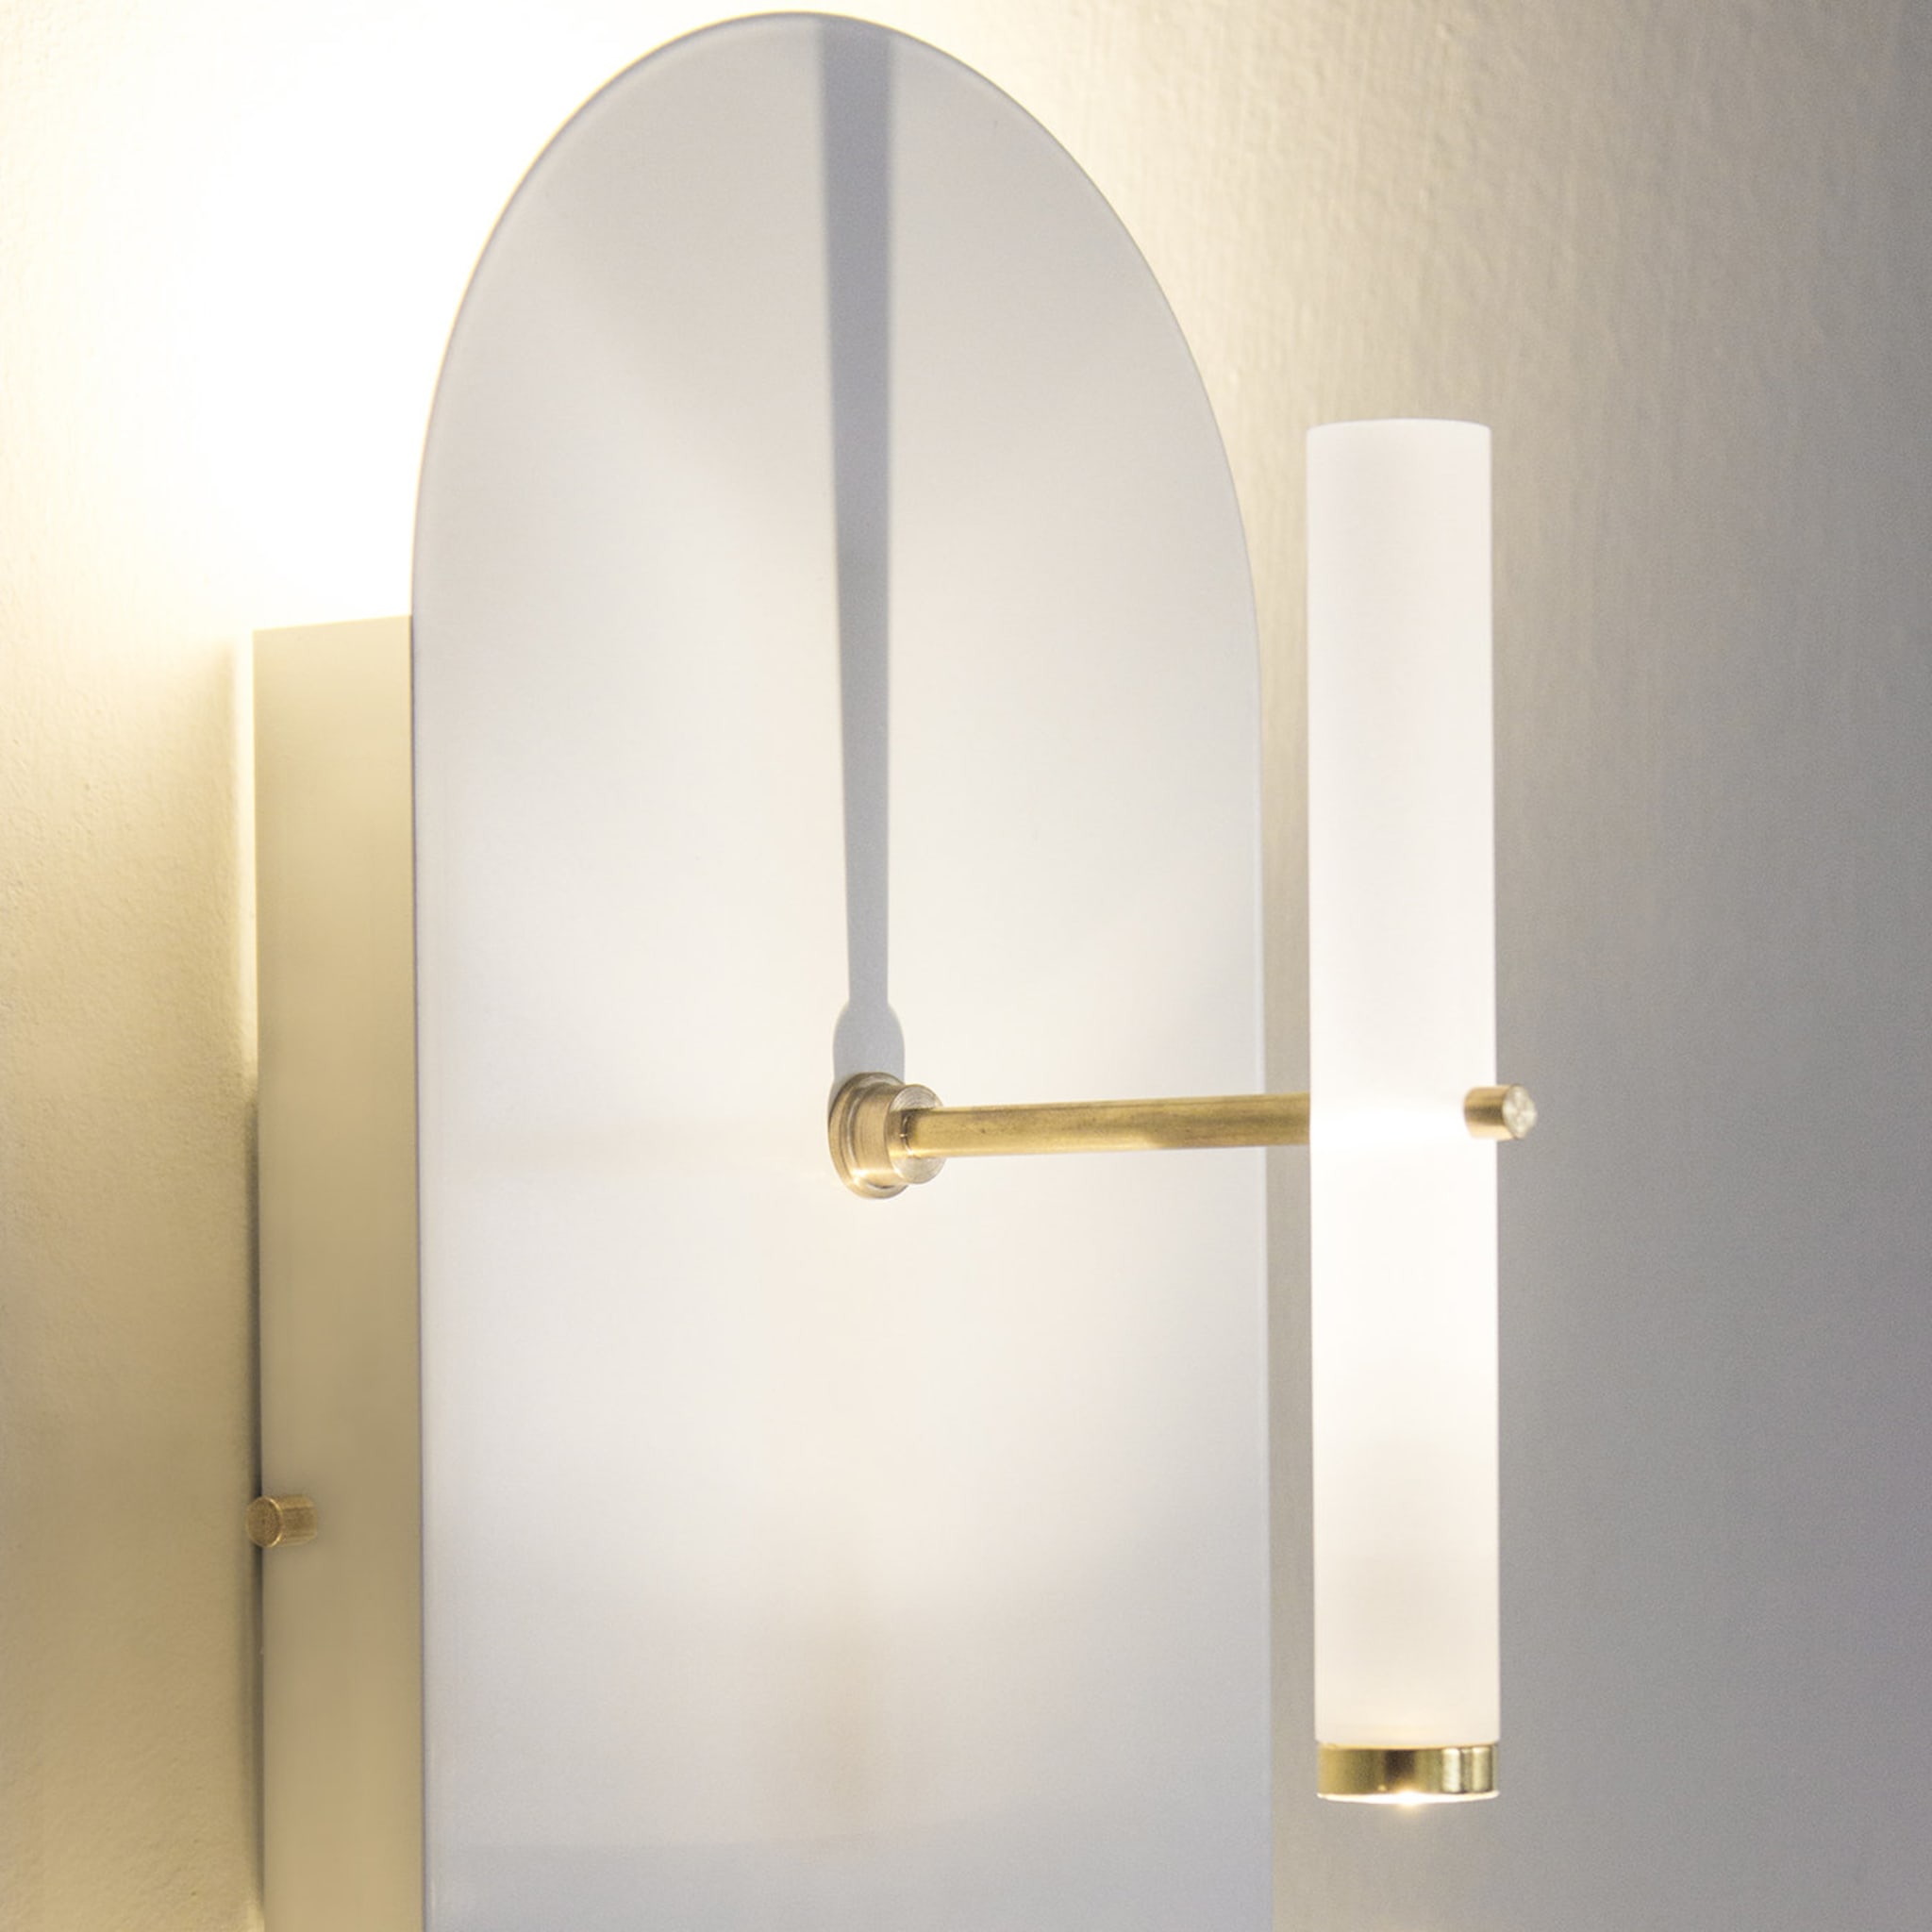 Equilibrio Gold Wall Lamp - Alternative view 4